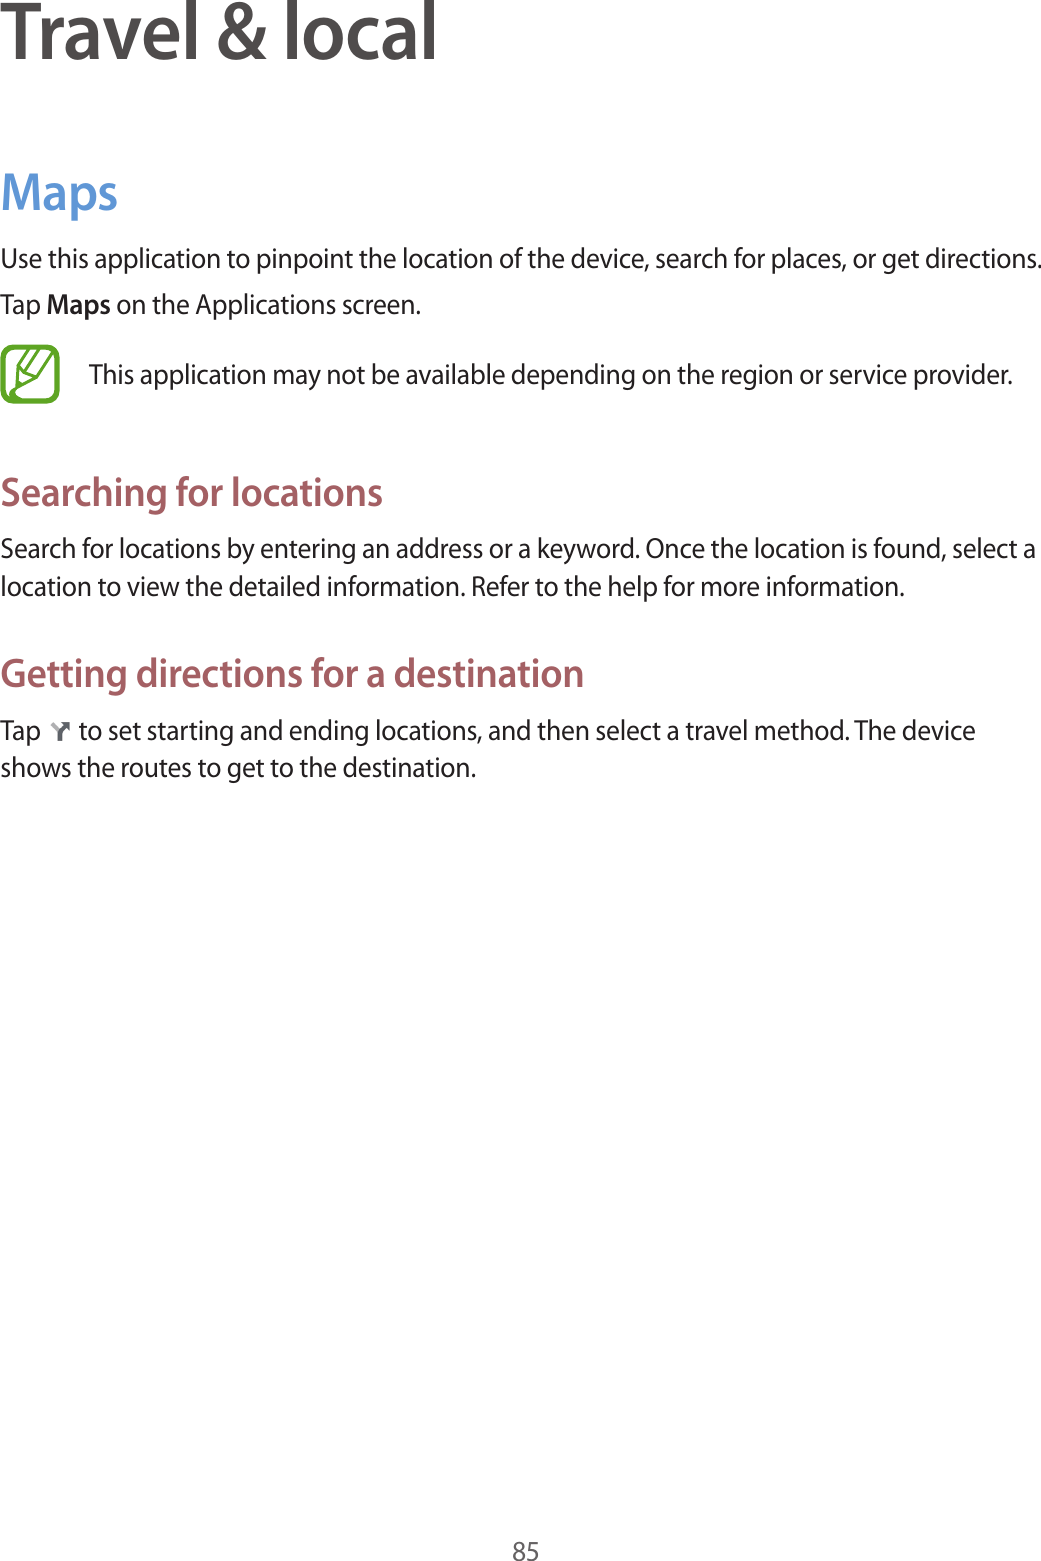 85Travel &amp; localMapsUse this application to pinpoint the location of the device, search for places, or get directions.Tap Maps on the Applications screen.This application may not be available depending on the region or service provider.Searching for locationsSearch for locations by entering an address or a keyword. Once the location is found, select a location to view the detailed information. Refer to the help for more information.Getting directions for a destinationTap   to set starting and ending locations, and then select a travel method. The device shows the routes to get to the destination.